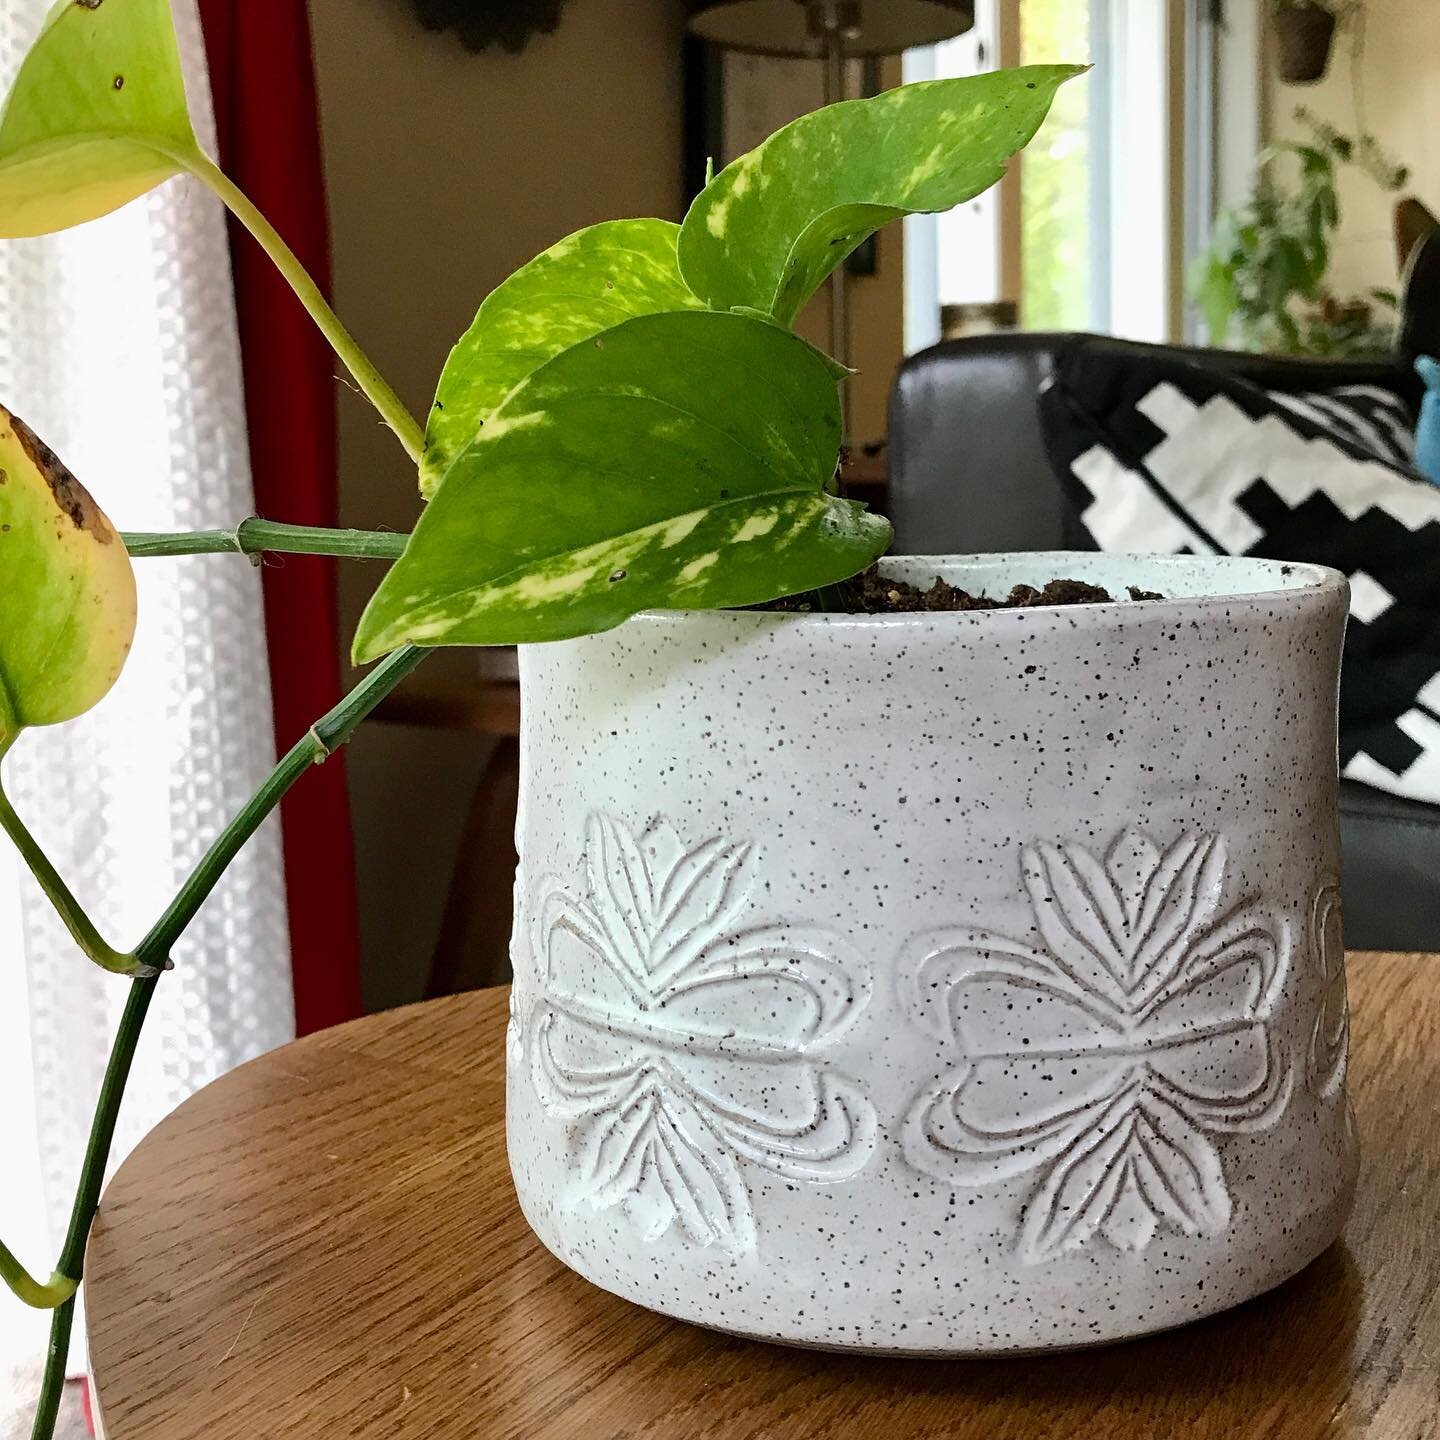 Fall is here, so it&rsquo;s back inside for this old friend. Repotted in one of the small planters and ready for some winter coziness. 
My planters do not have drainage holes, so they are perfect for plant friends who like long stretches between wate